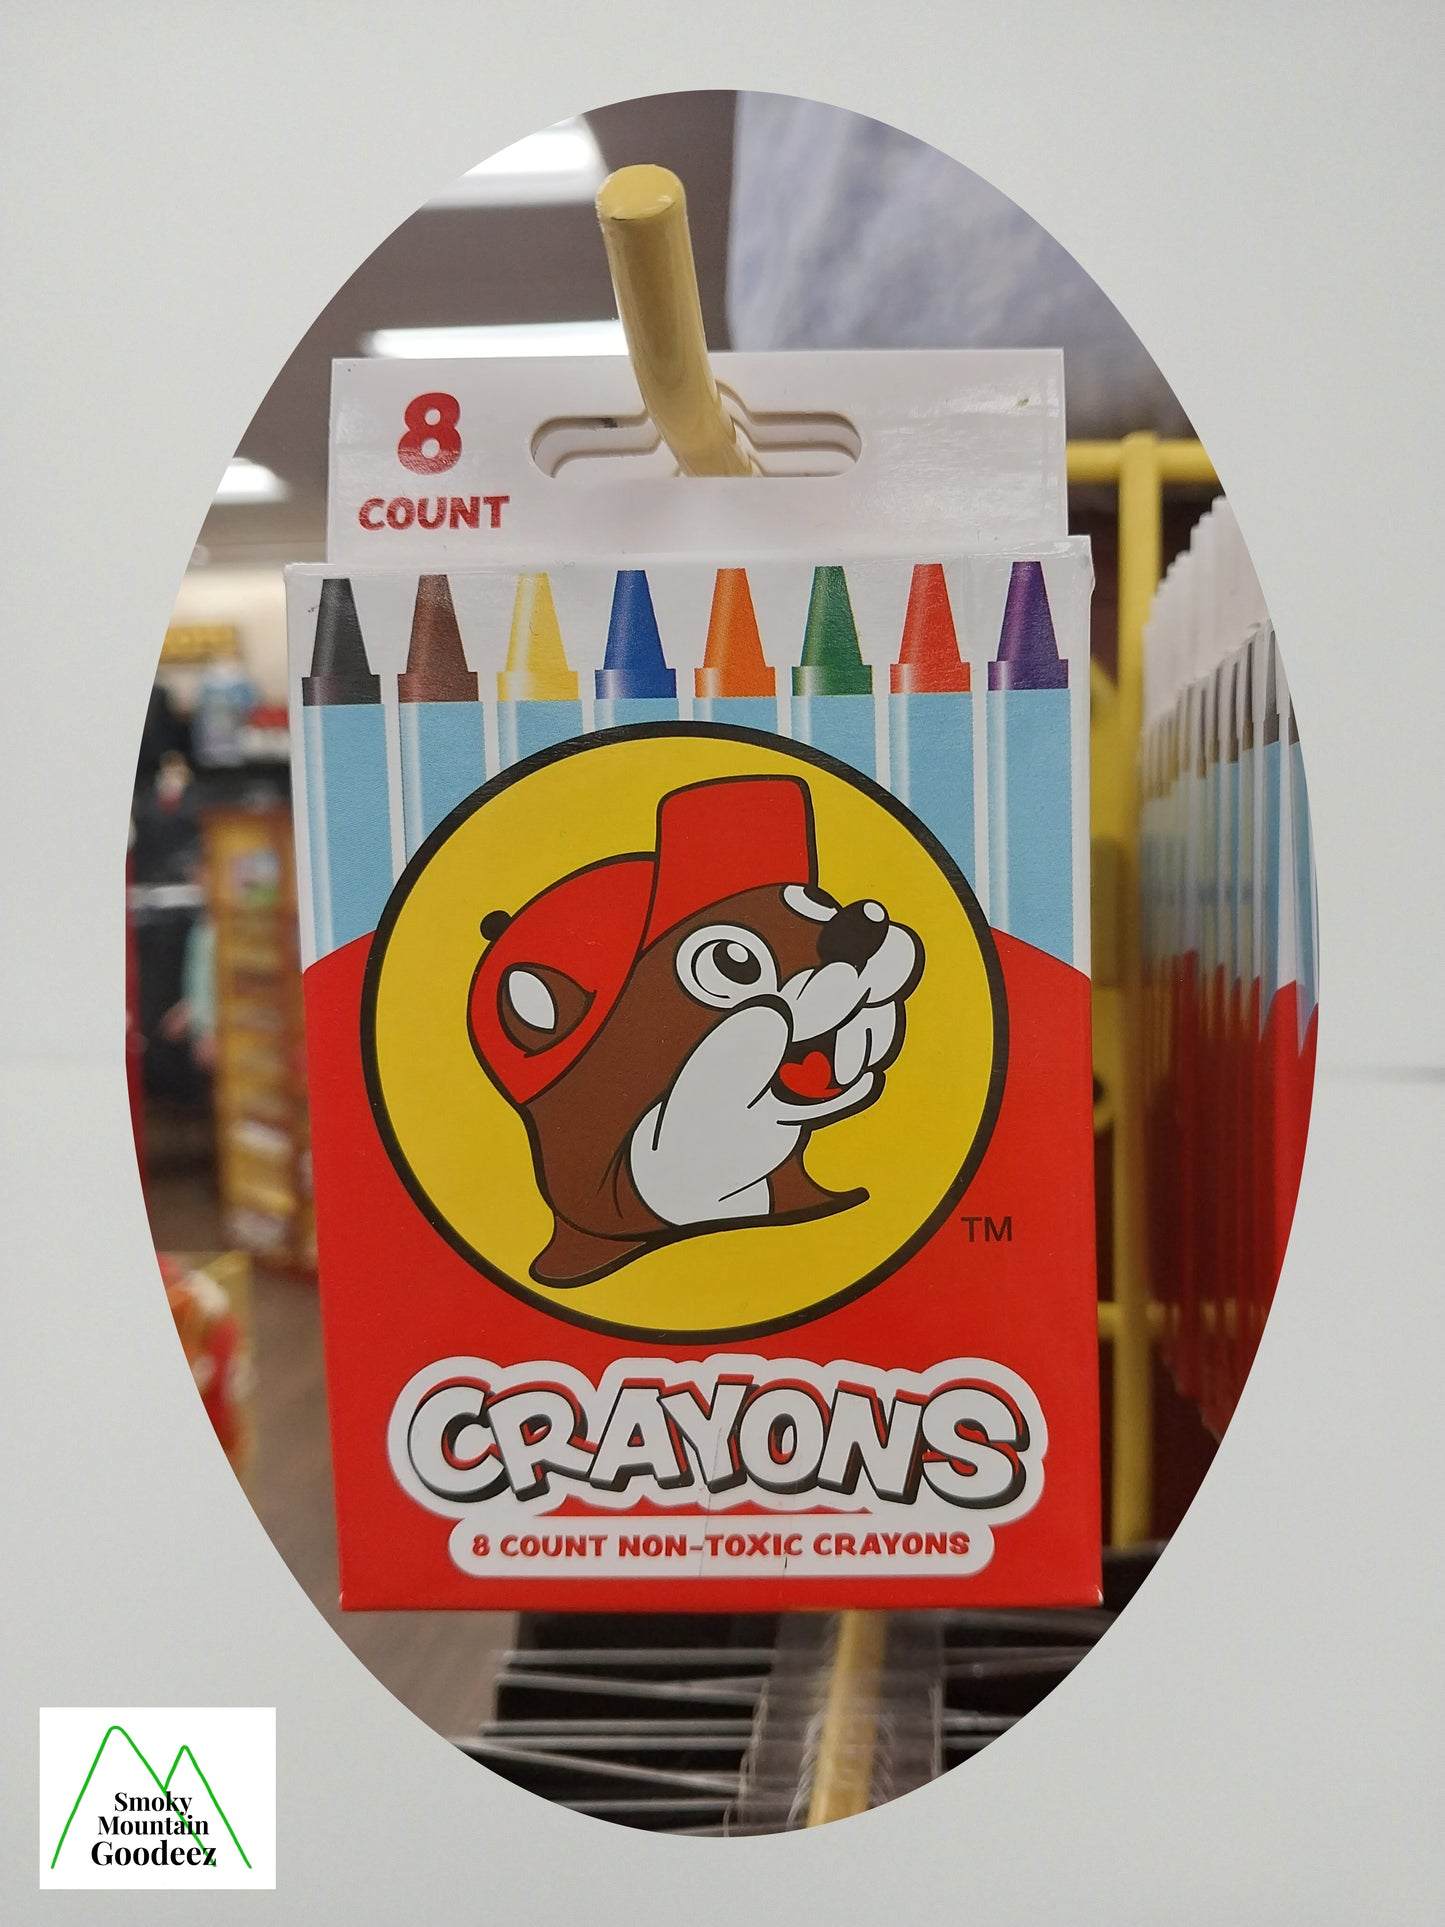 Buc-ee's 8 Count Box of Non-toxic Crayons